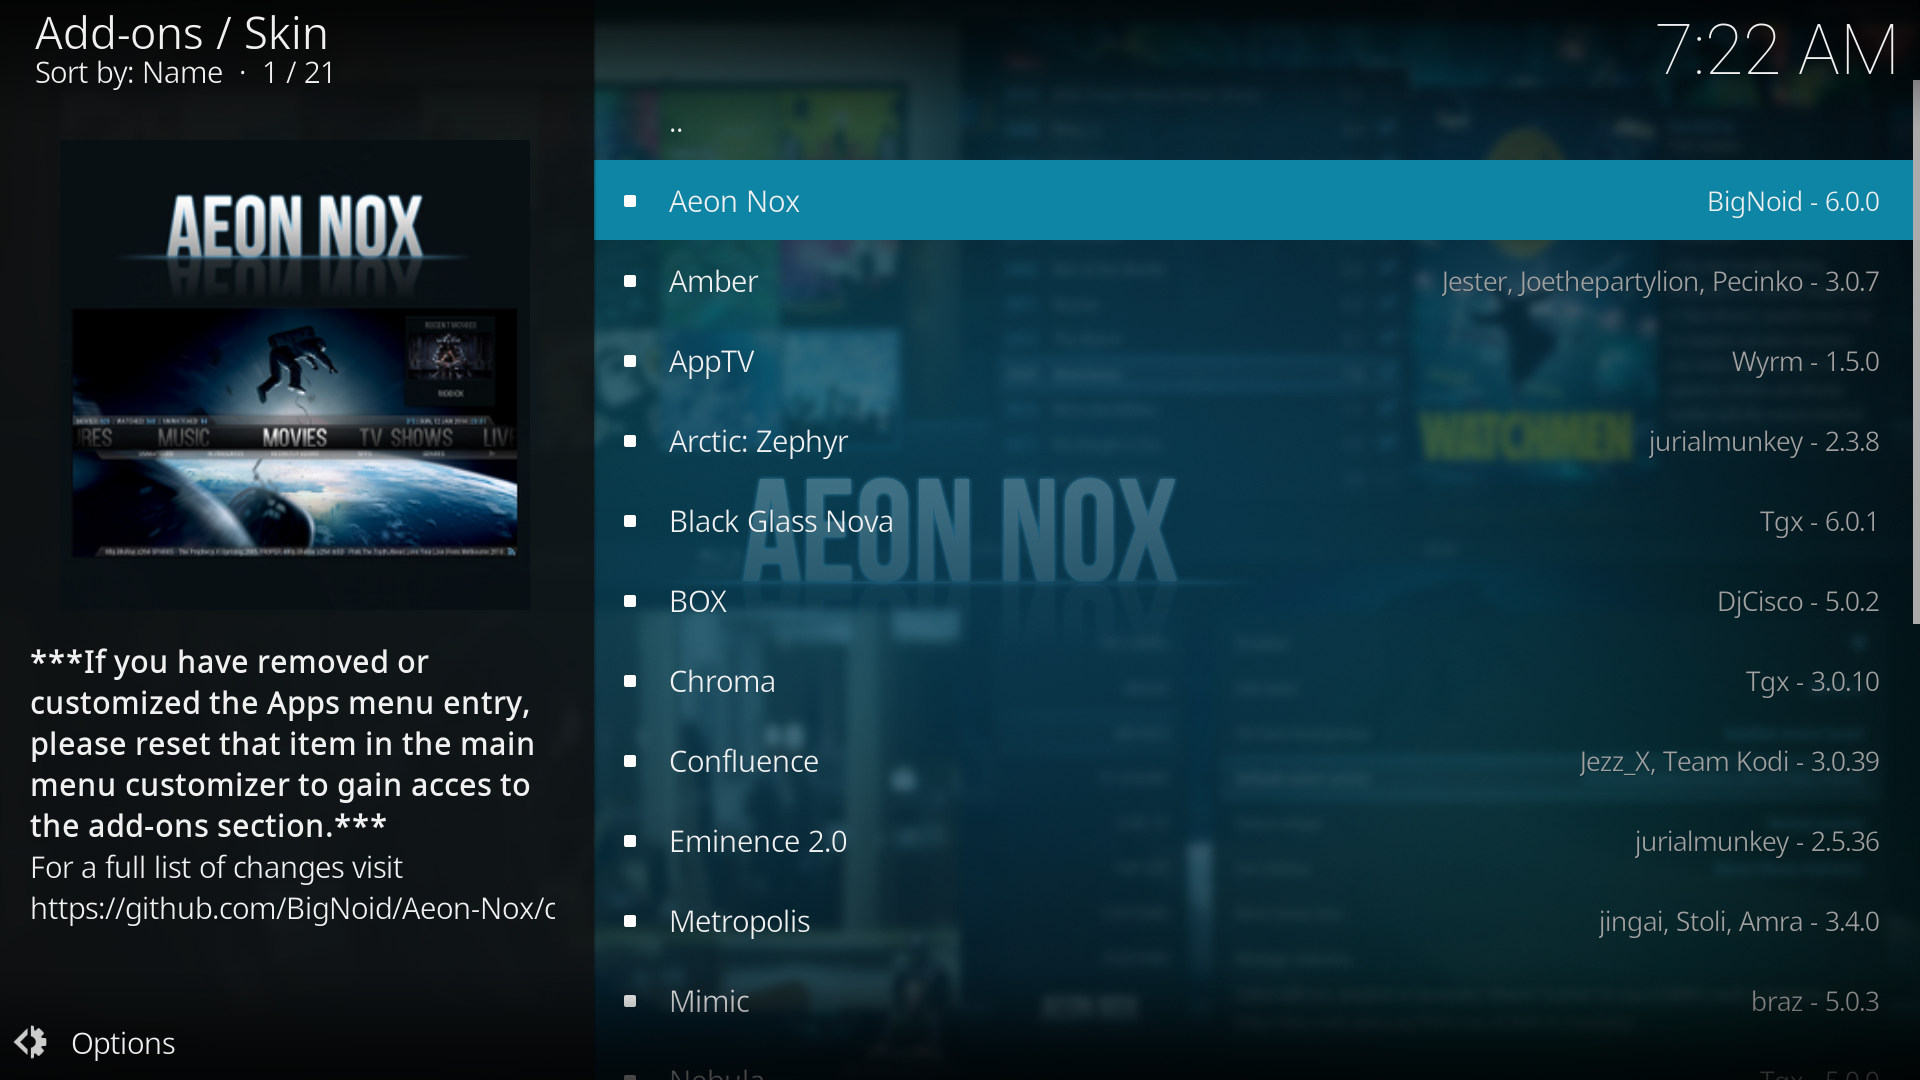 Step 4: Select the add-on you want to install, in this case the skin Aeon Nox.